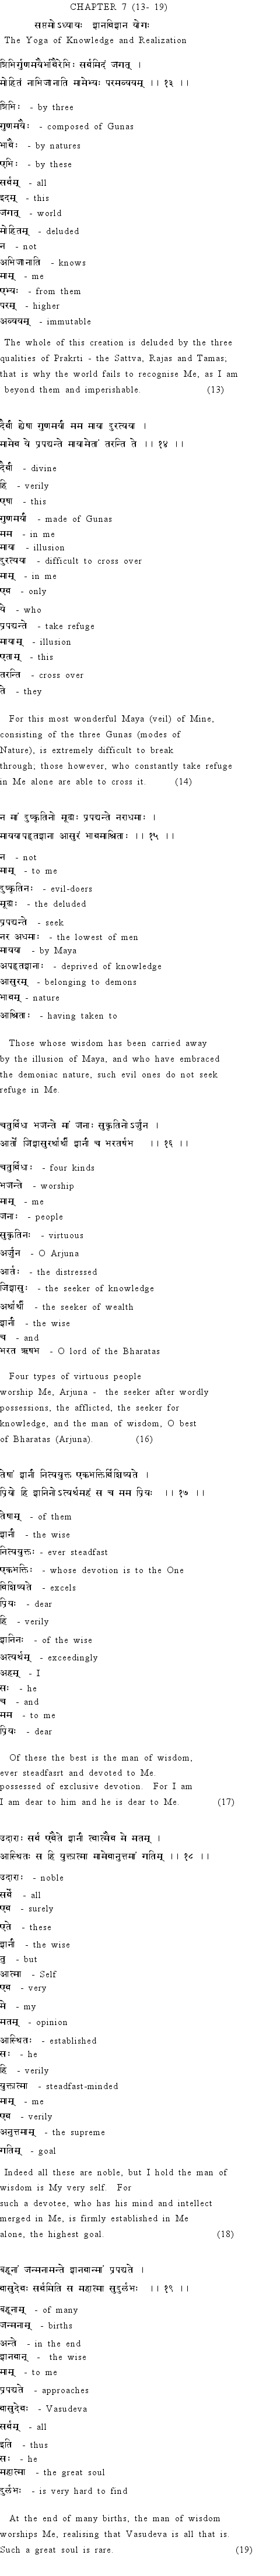 Text of Ch.7_3